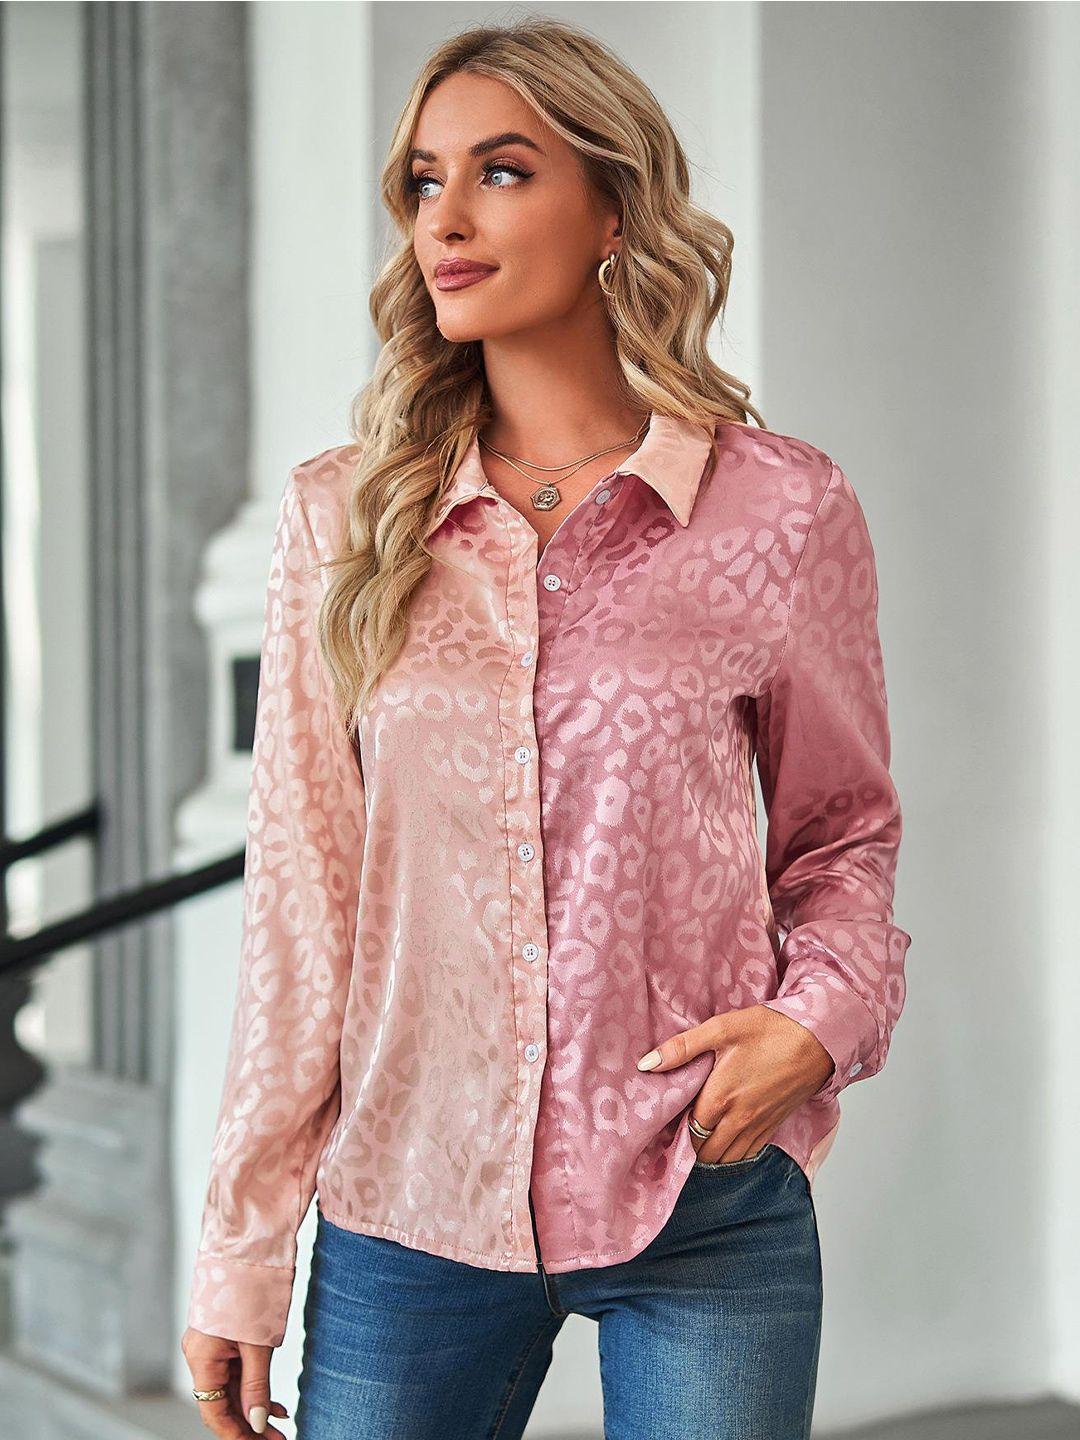 stylecast pink abstract print shirt style top